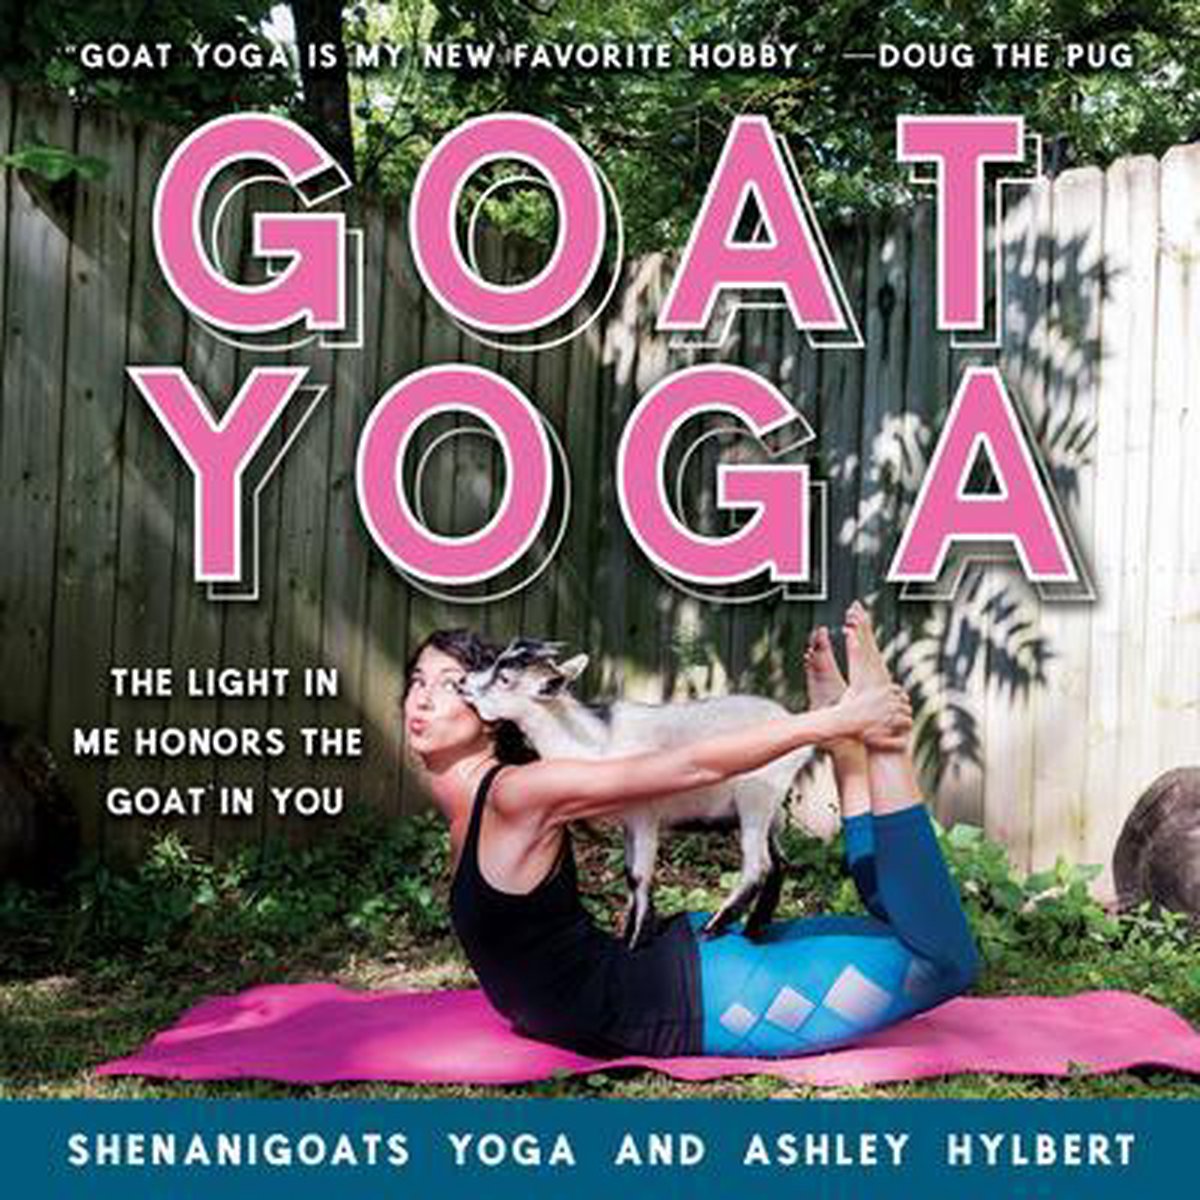 Goat Yoga: The Light in Me Honors the Goat in You, Yoga